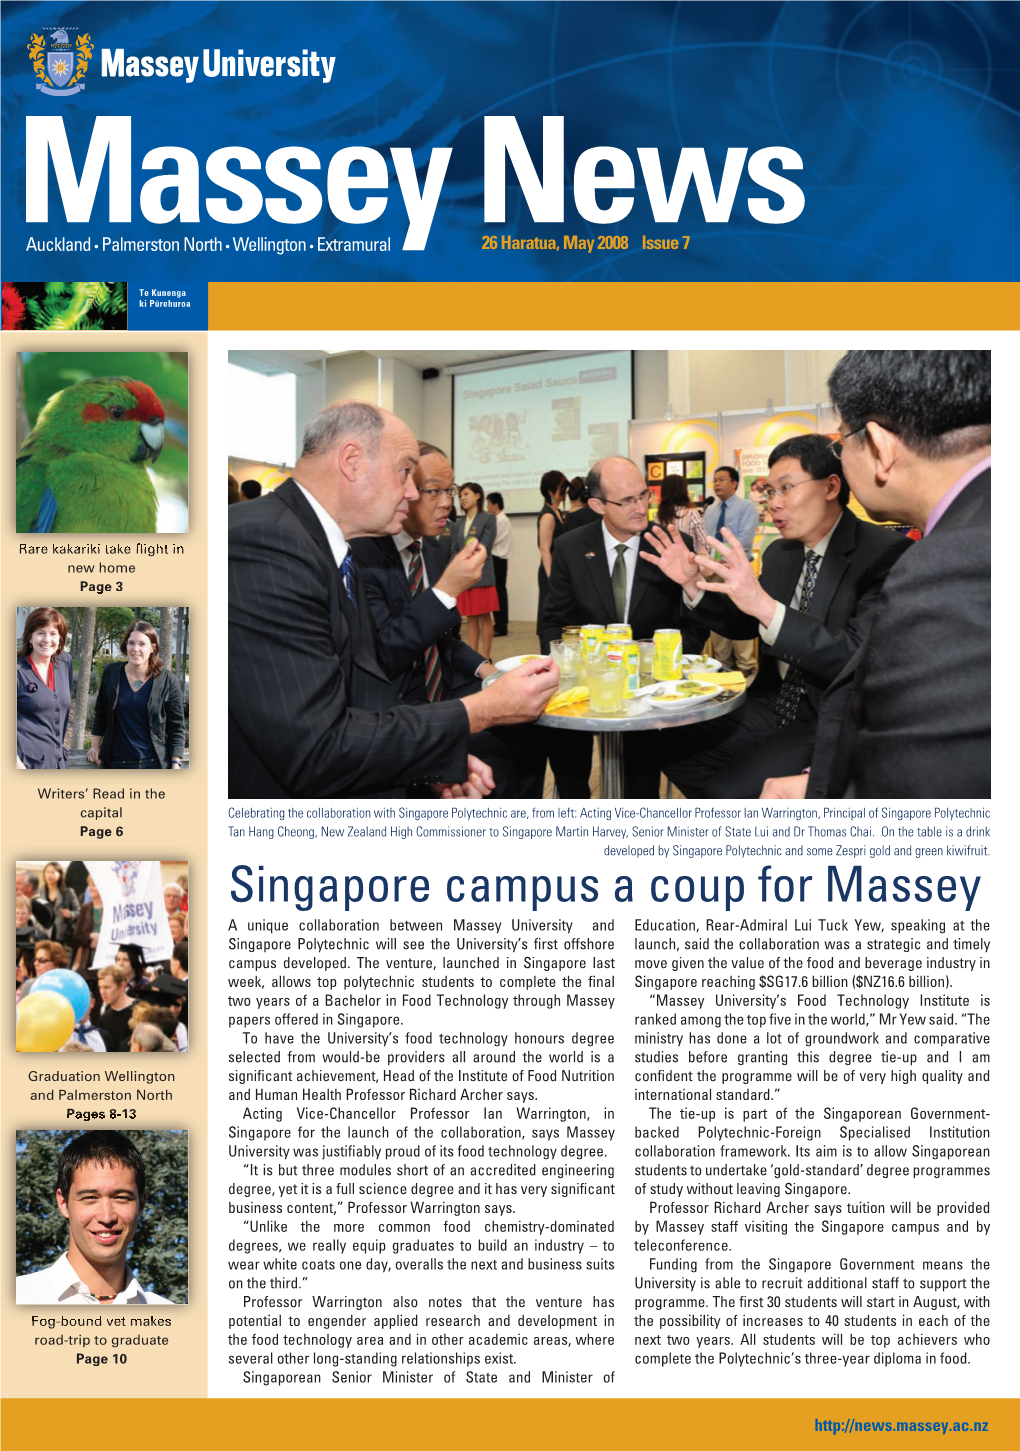 Singapore Campus a Coup for Massey